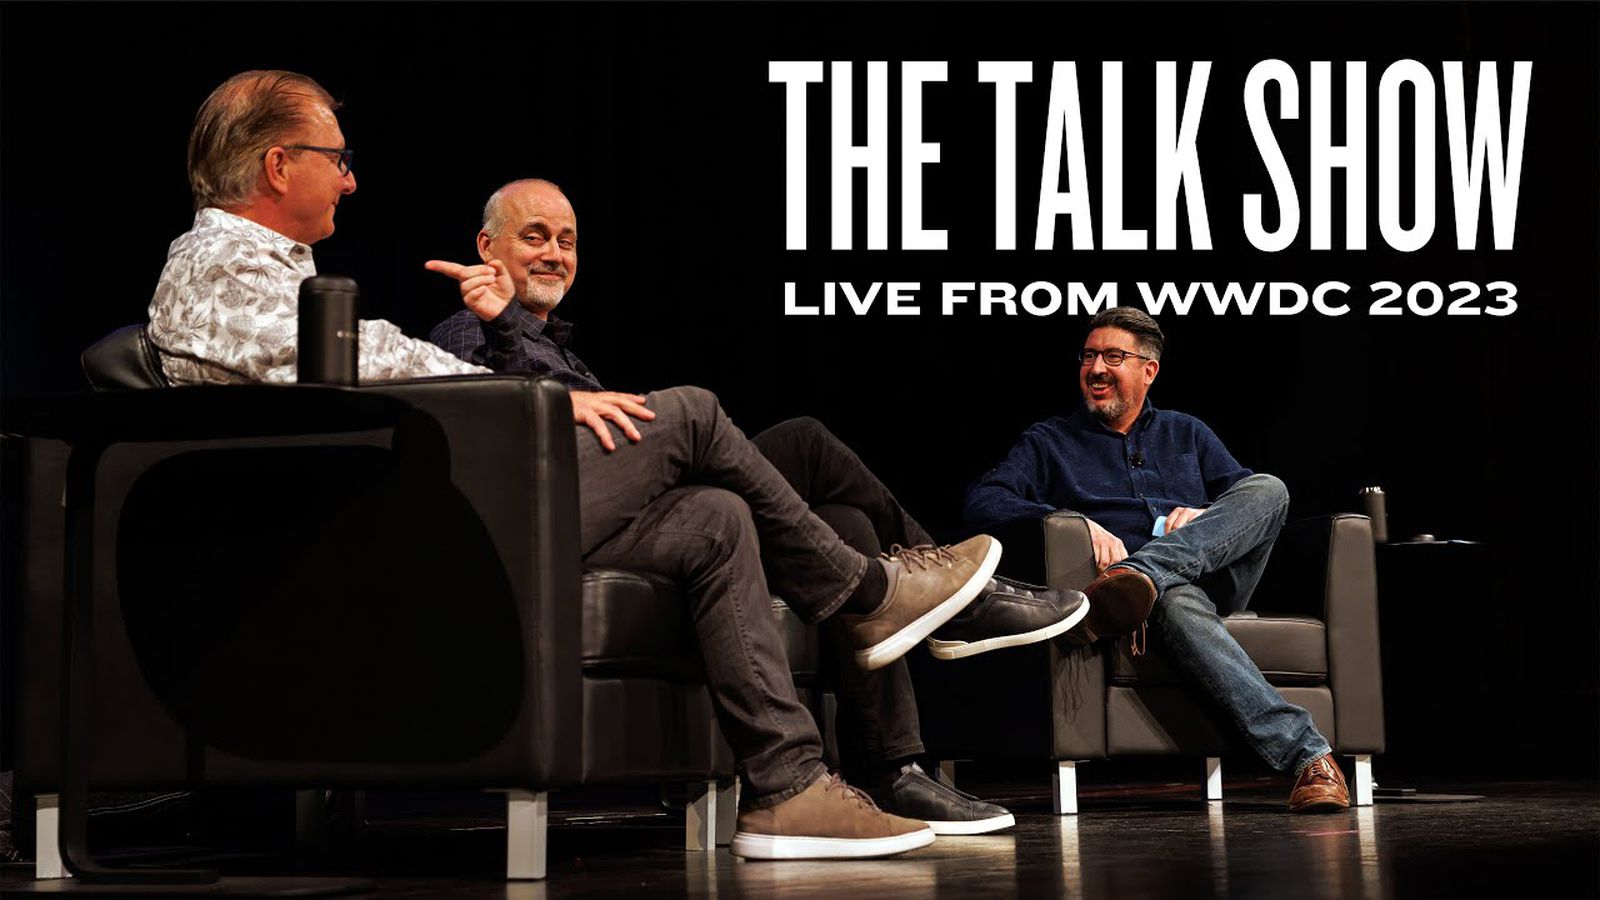 The Talk Show Live From WWDC 2023 With Craig Federighi and Others Now Available on YouTube - macrumors.com